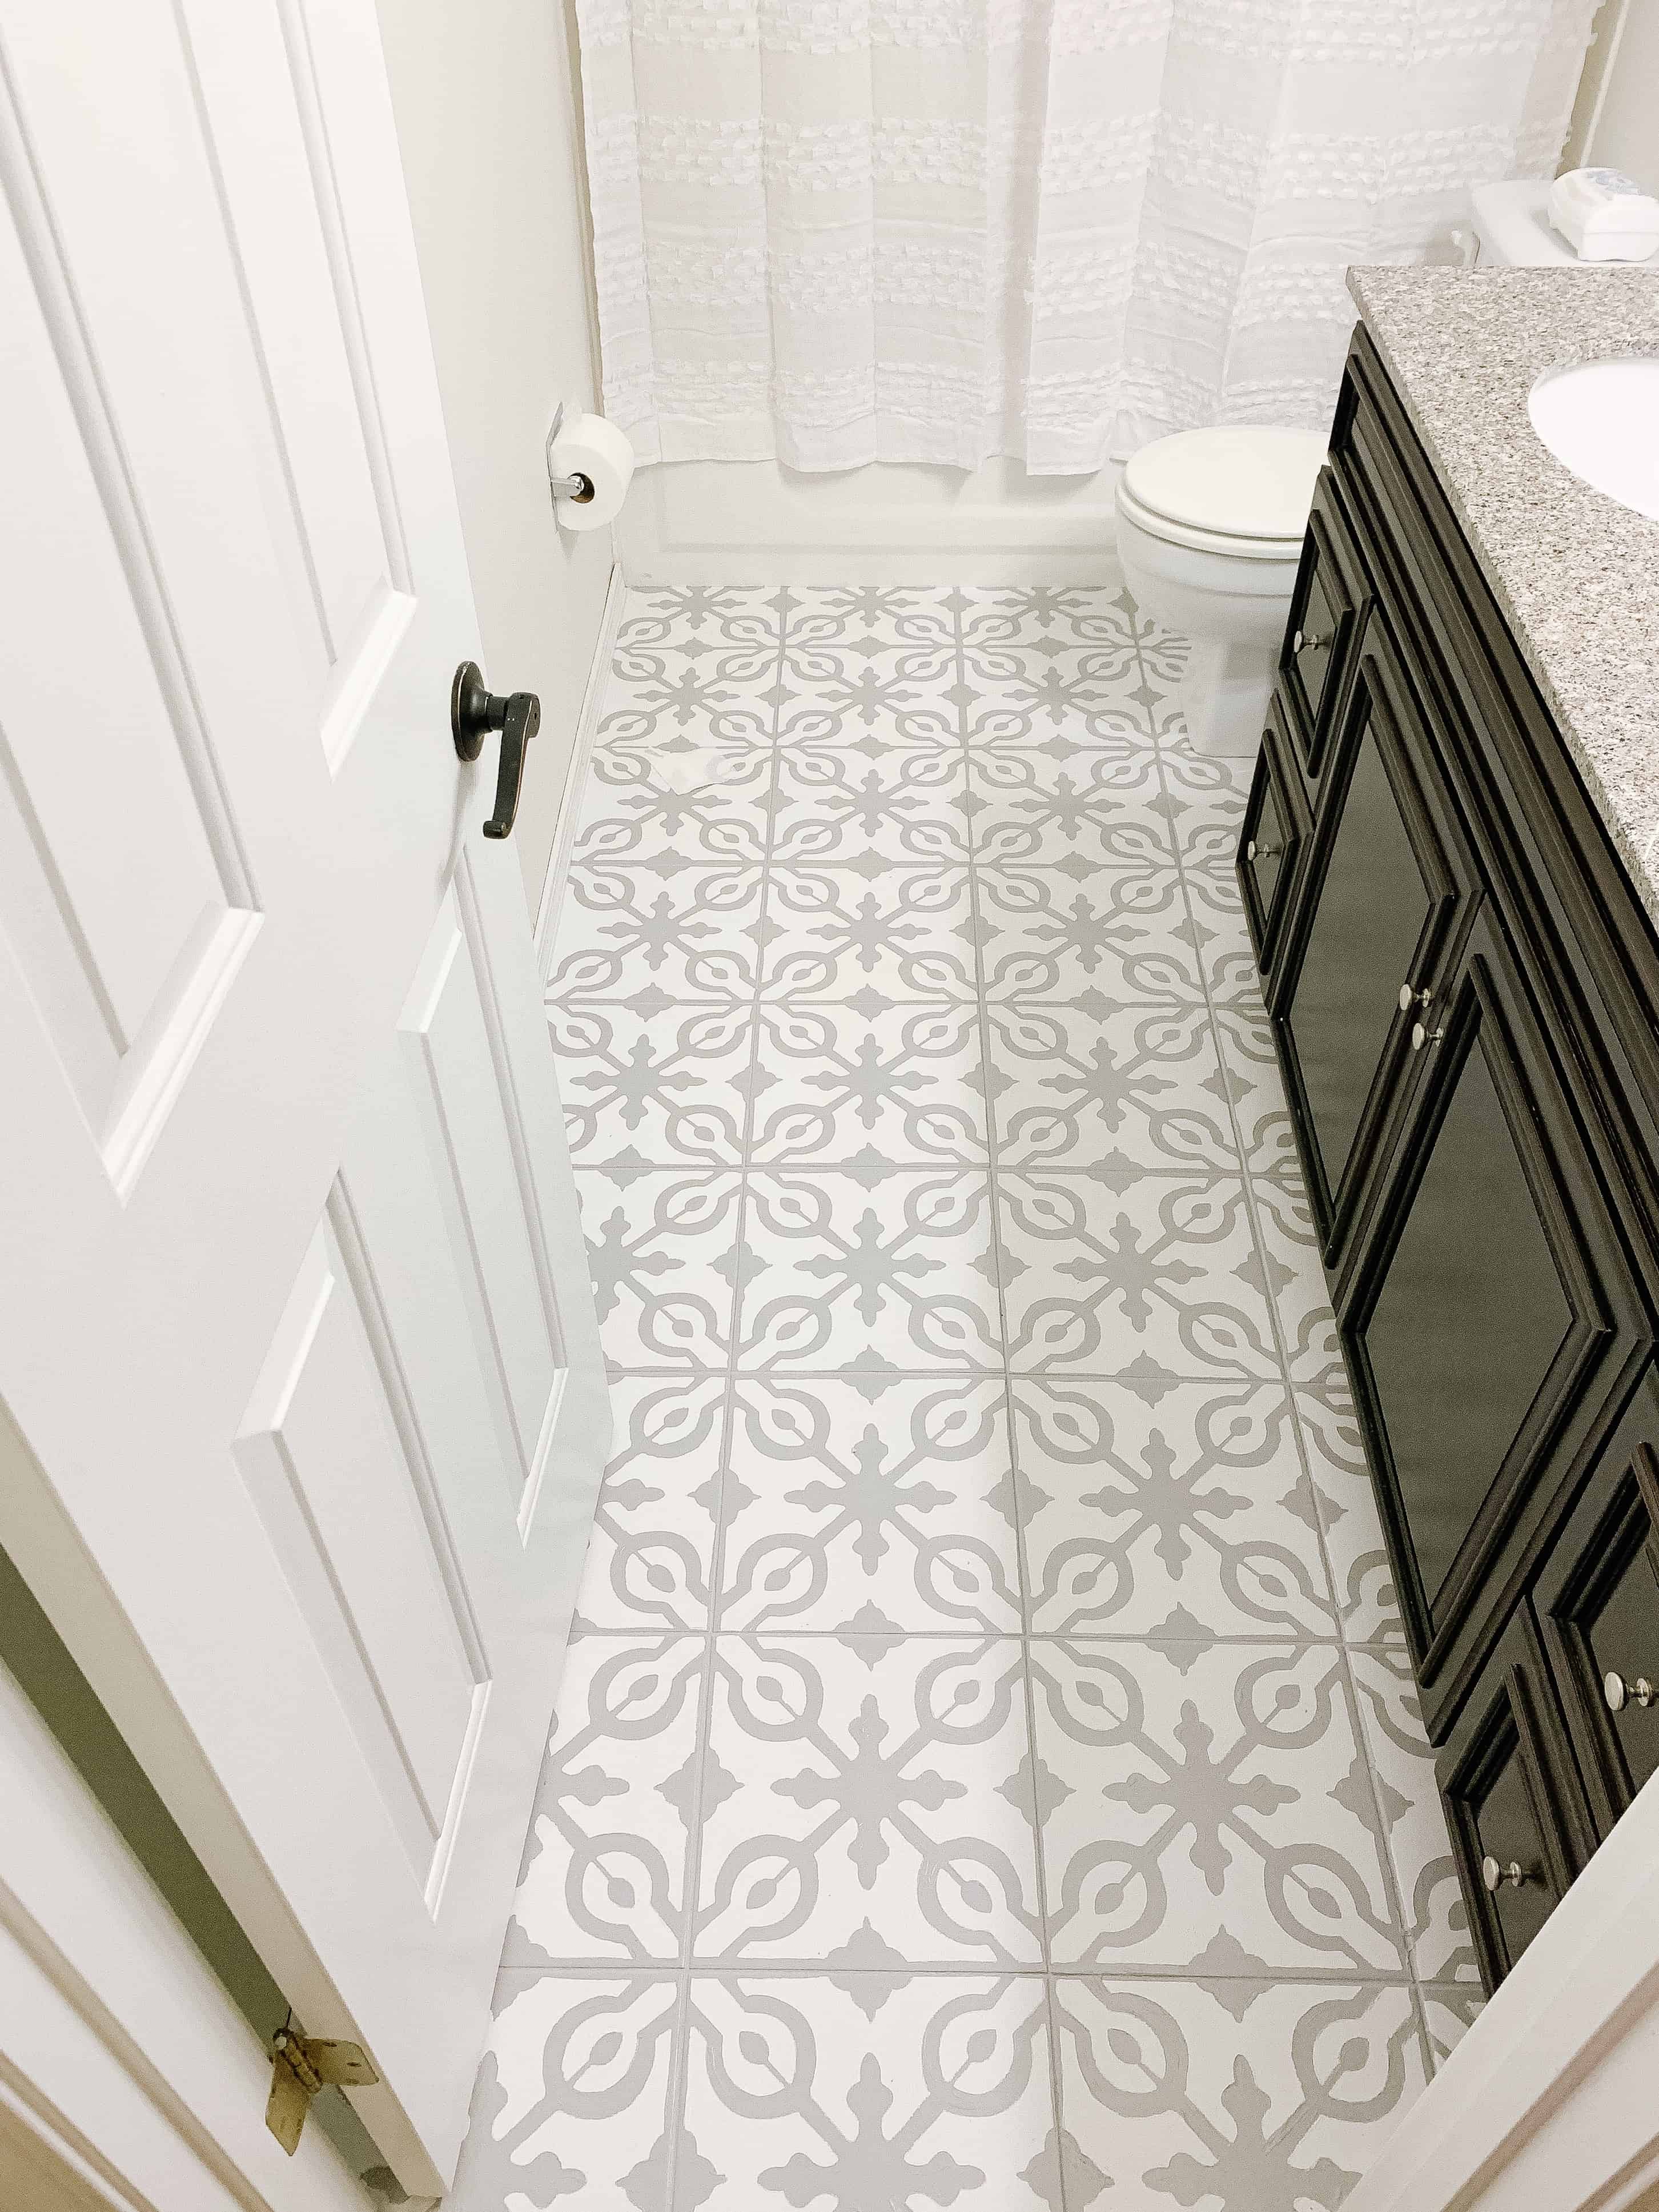 How To Paint Tile Floors, Painting Floor Tiles